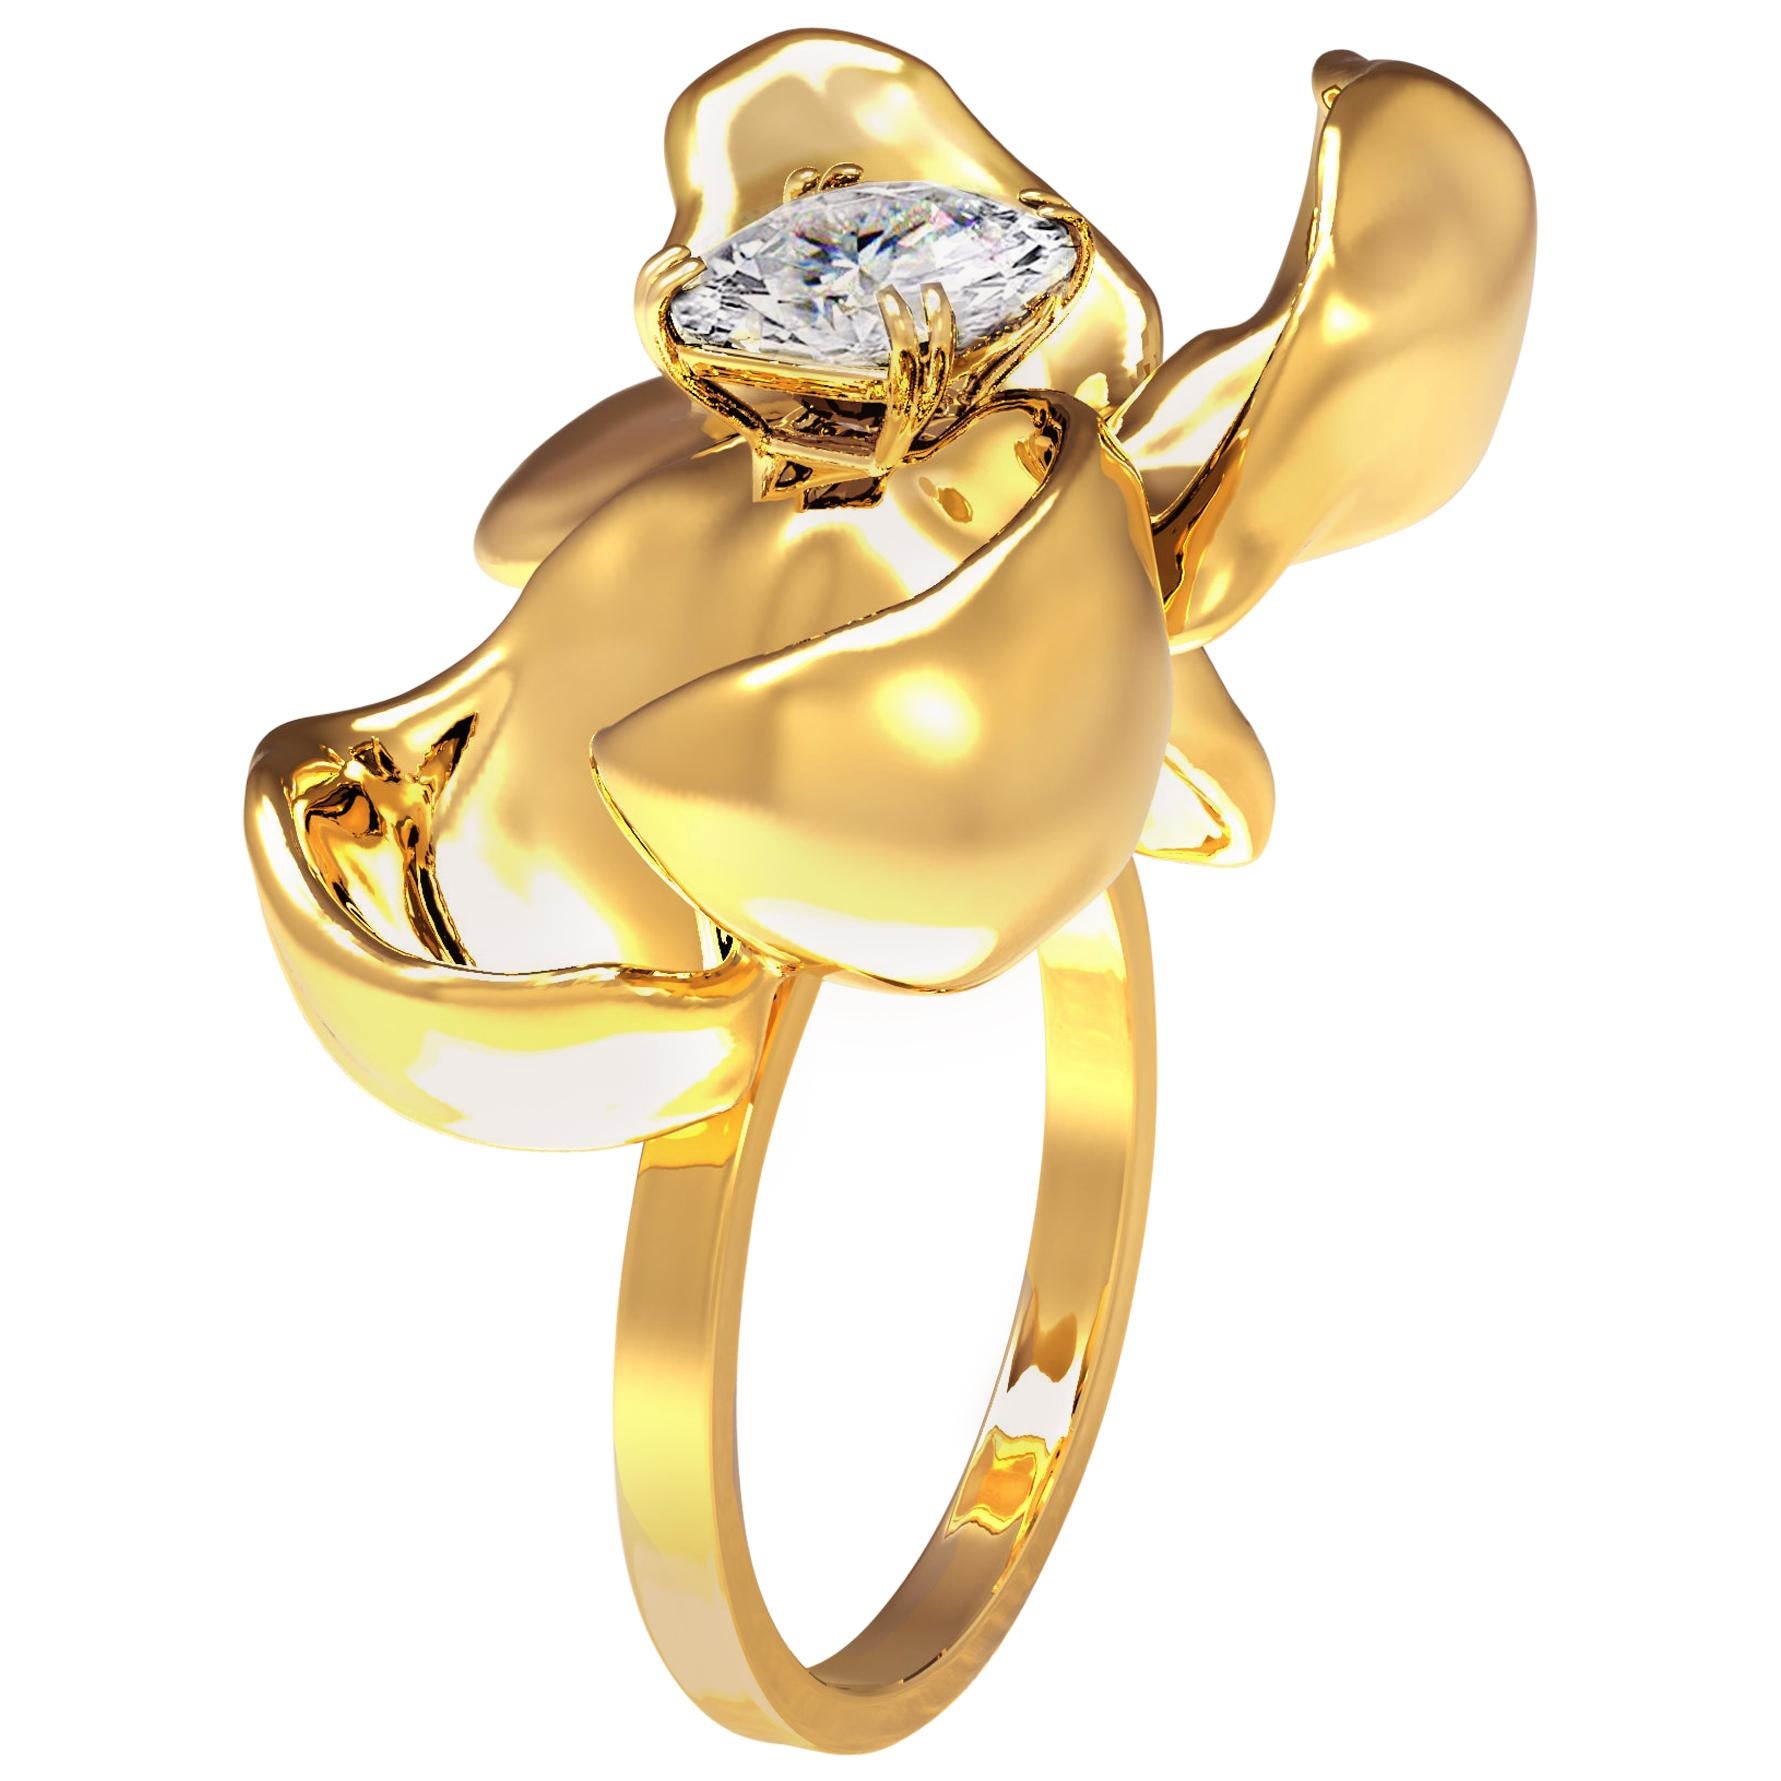 18 Karat Yellow Gold Engagement Ring with 1 Carat Diamond For Sale